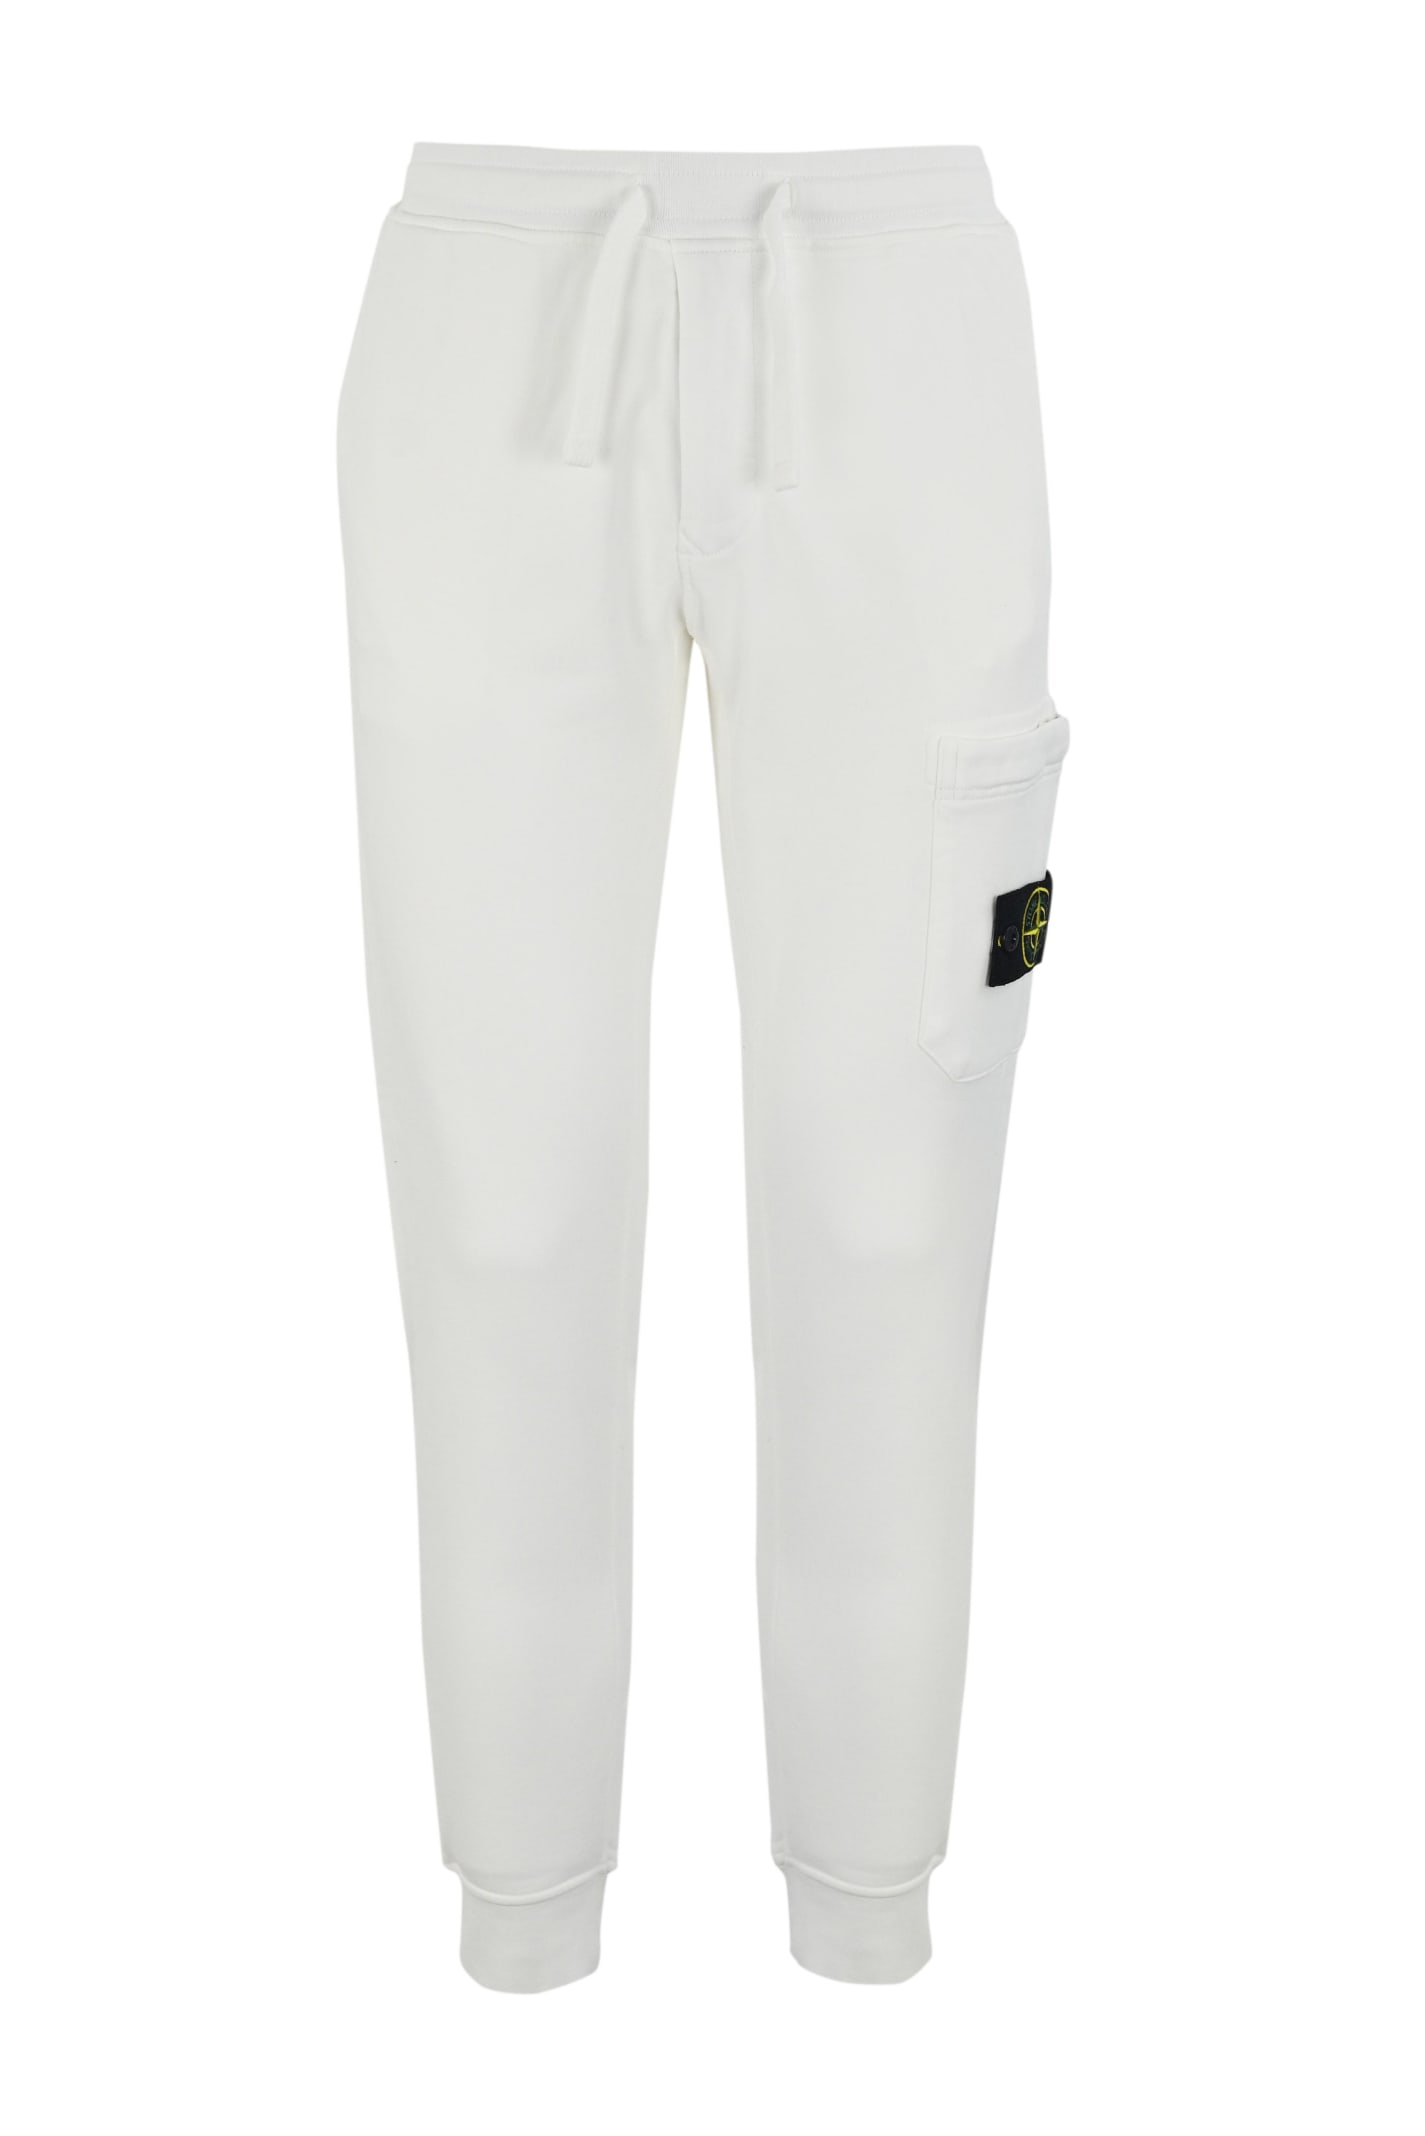 Stone Island Sports Trousers 64551 In White